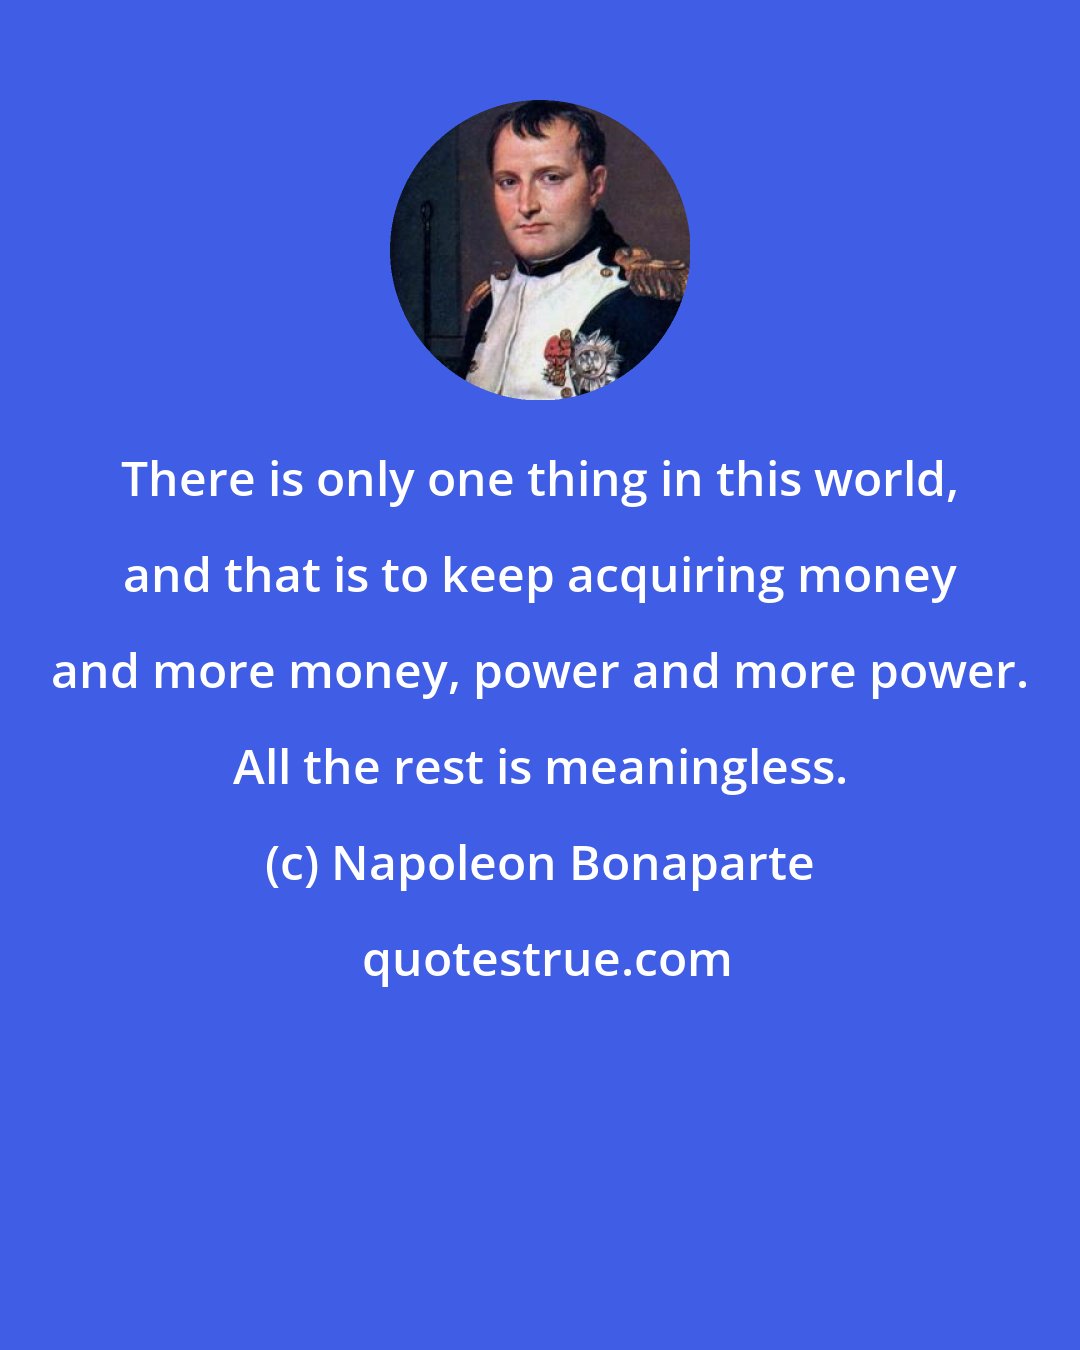 Napoleon Bonaparte: There is only one thing in this world, and that is to keep acquiring money and more money, power and more power. All the rest is meaningless.